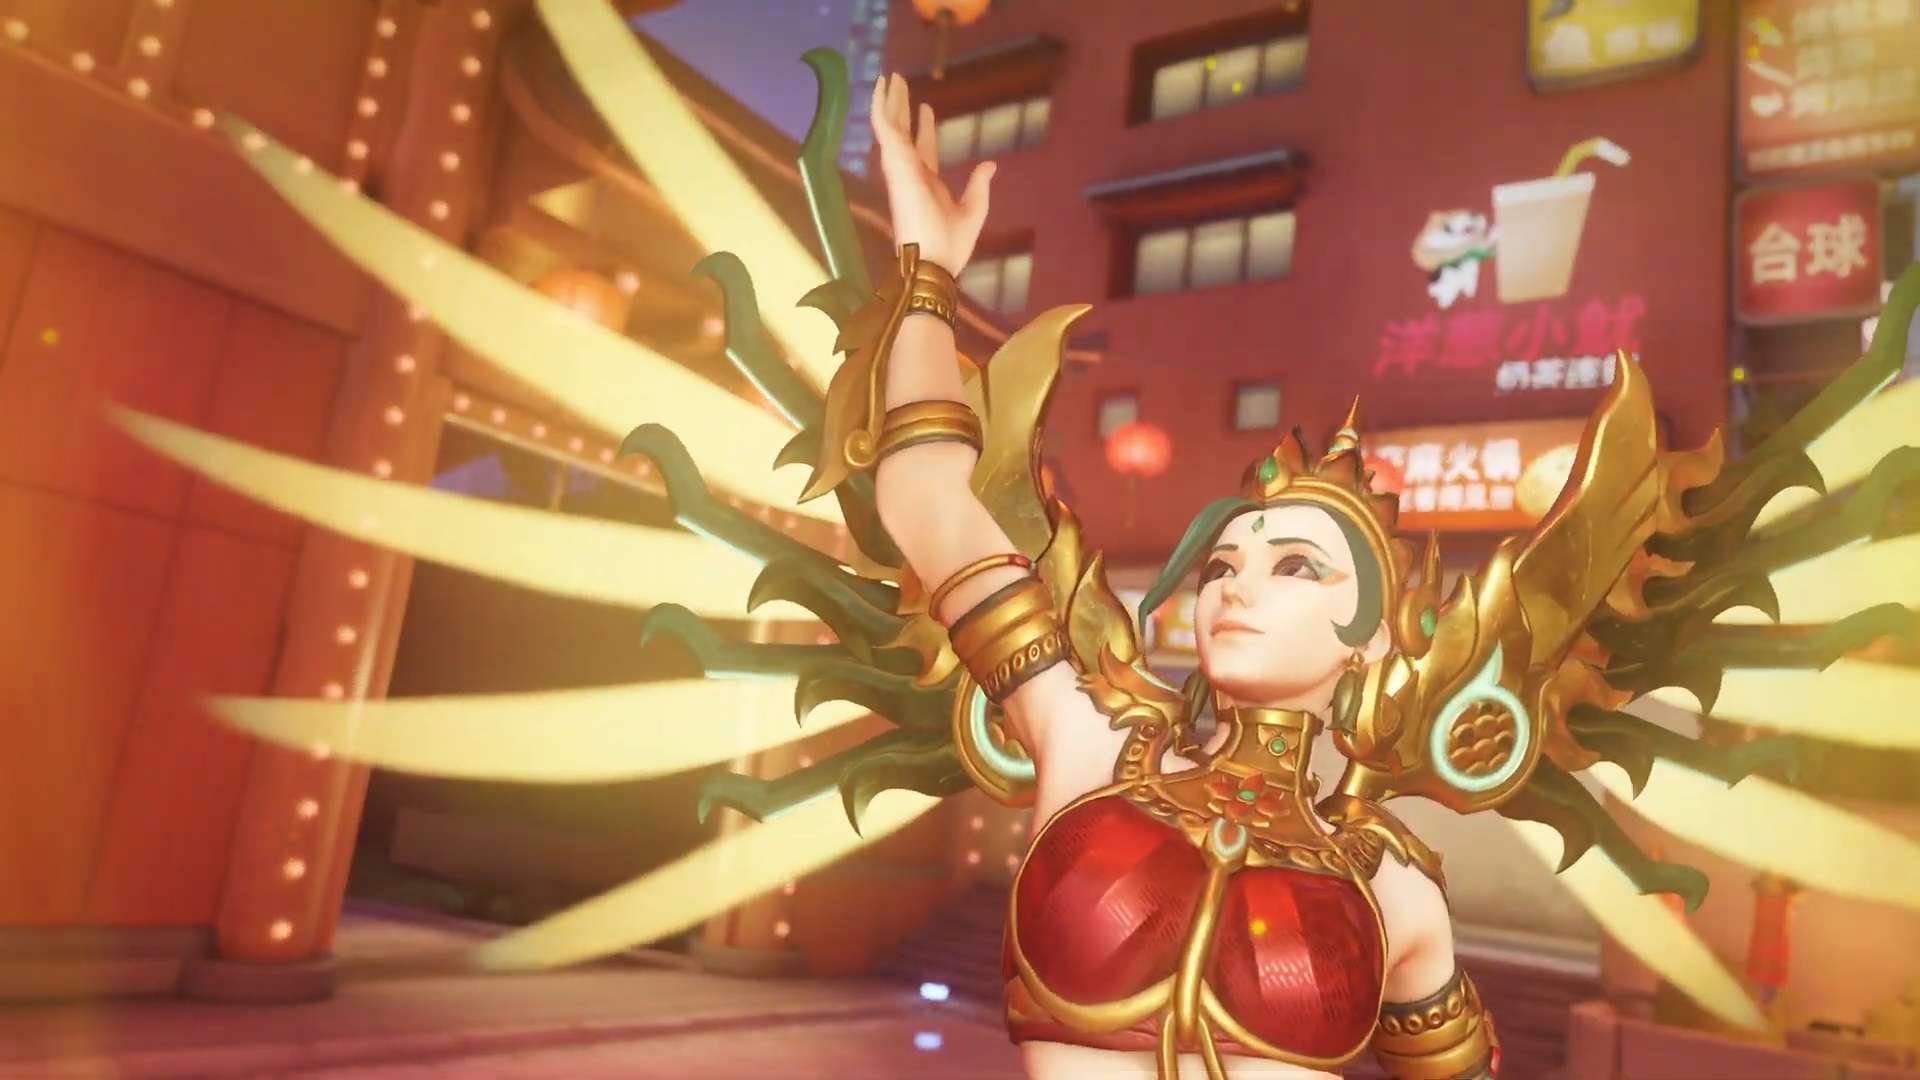 Overwatch 2 players question why Mercy is receiving yet another skin